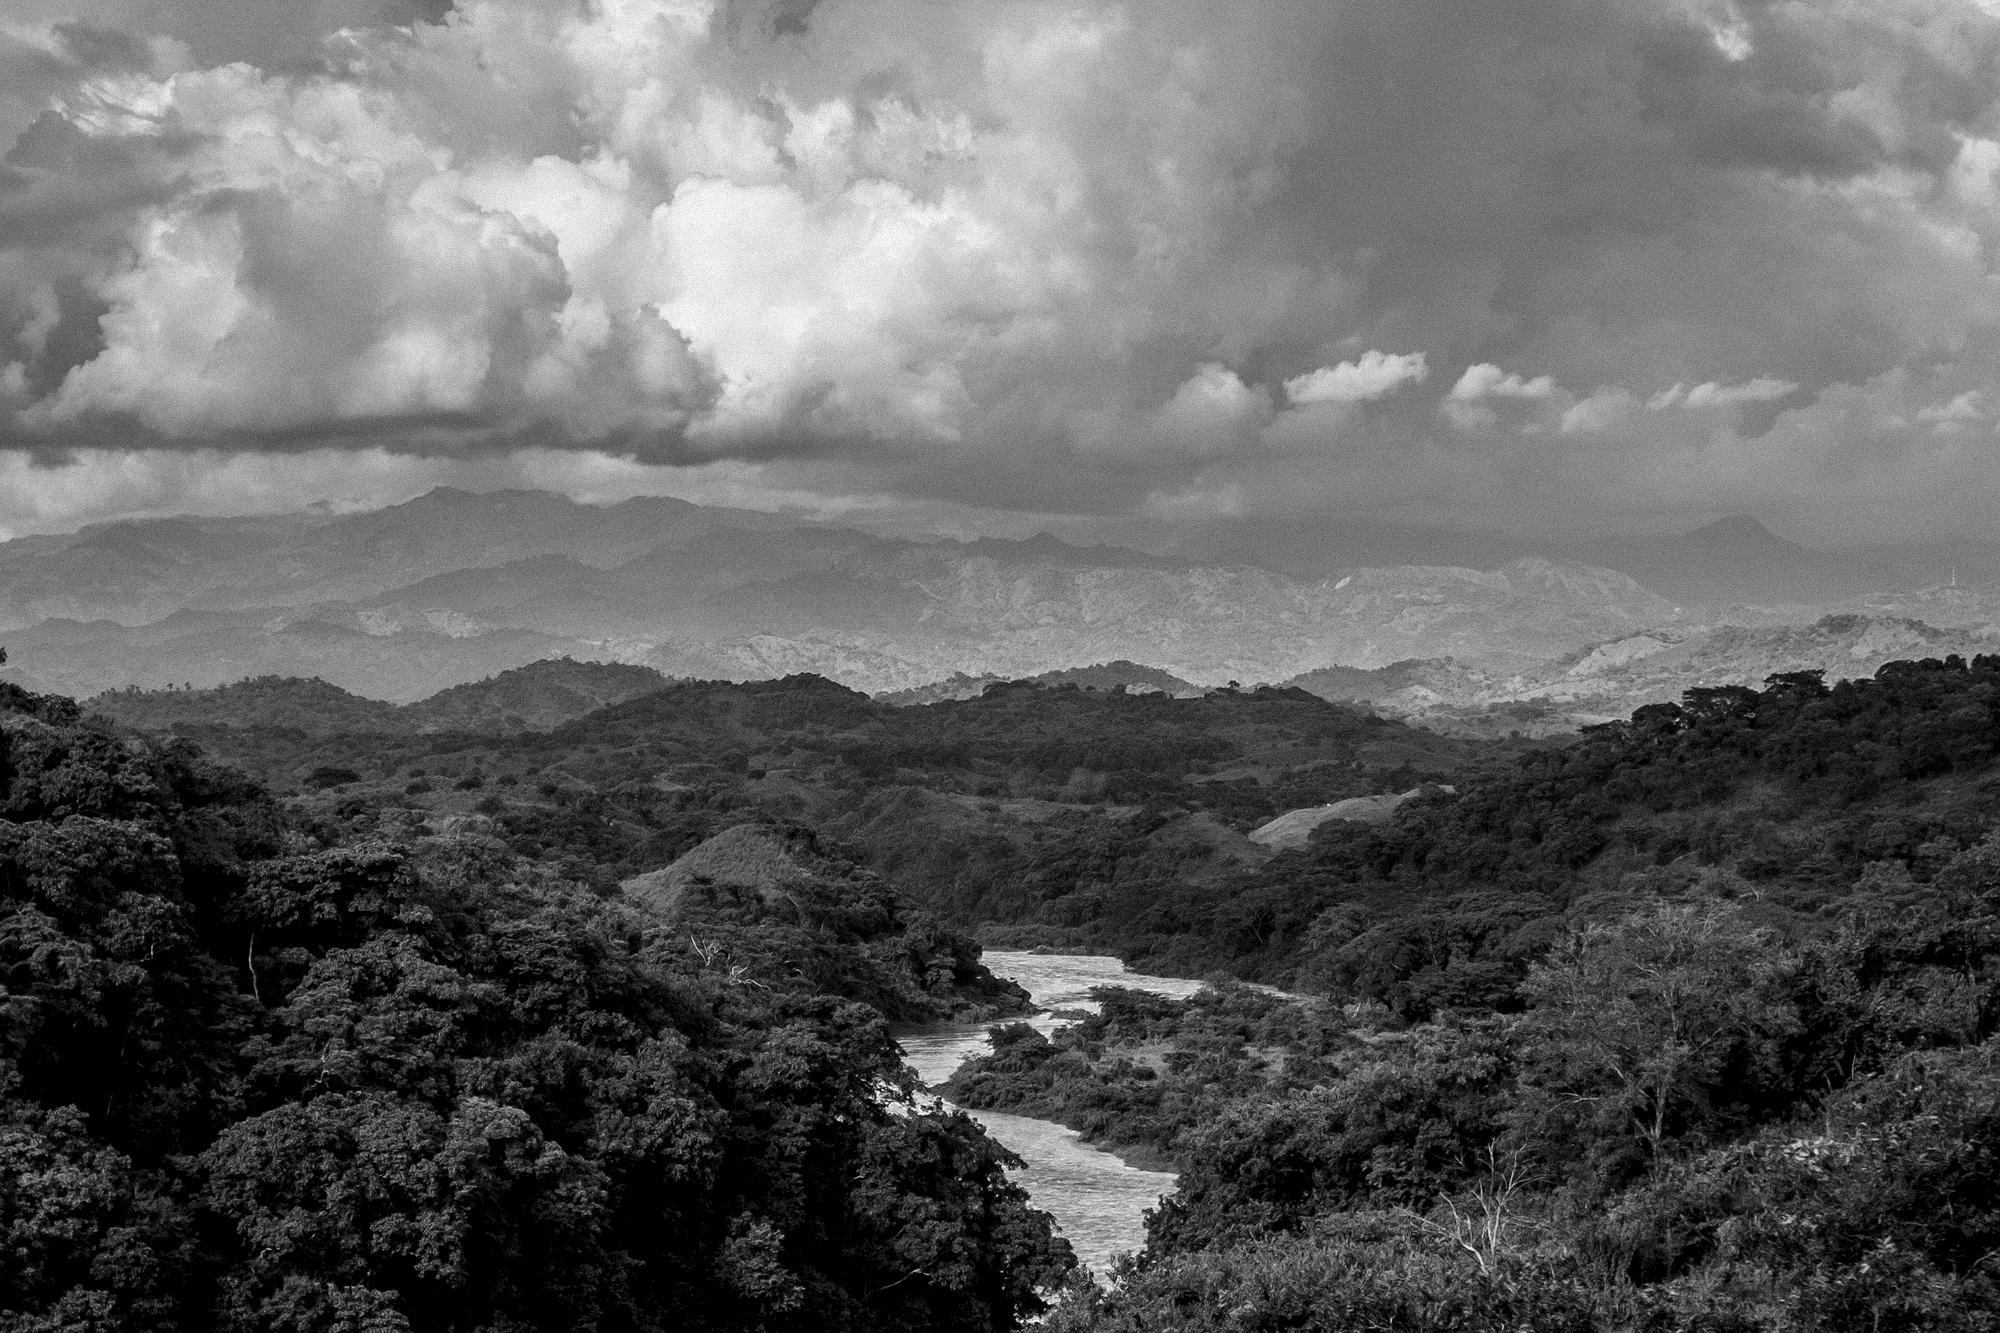 A view of the Lempa River from Piedras Coloradas, the area where thousands of refugees crossed through on March 18th, 1981, fleeing war and a barrage of bullets and mortars launched by the Salvadoran Air Force. On the left bank of the river is Honduras.